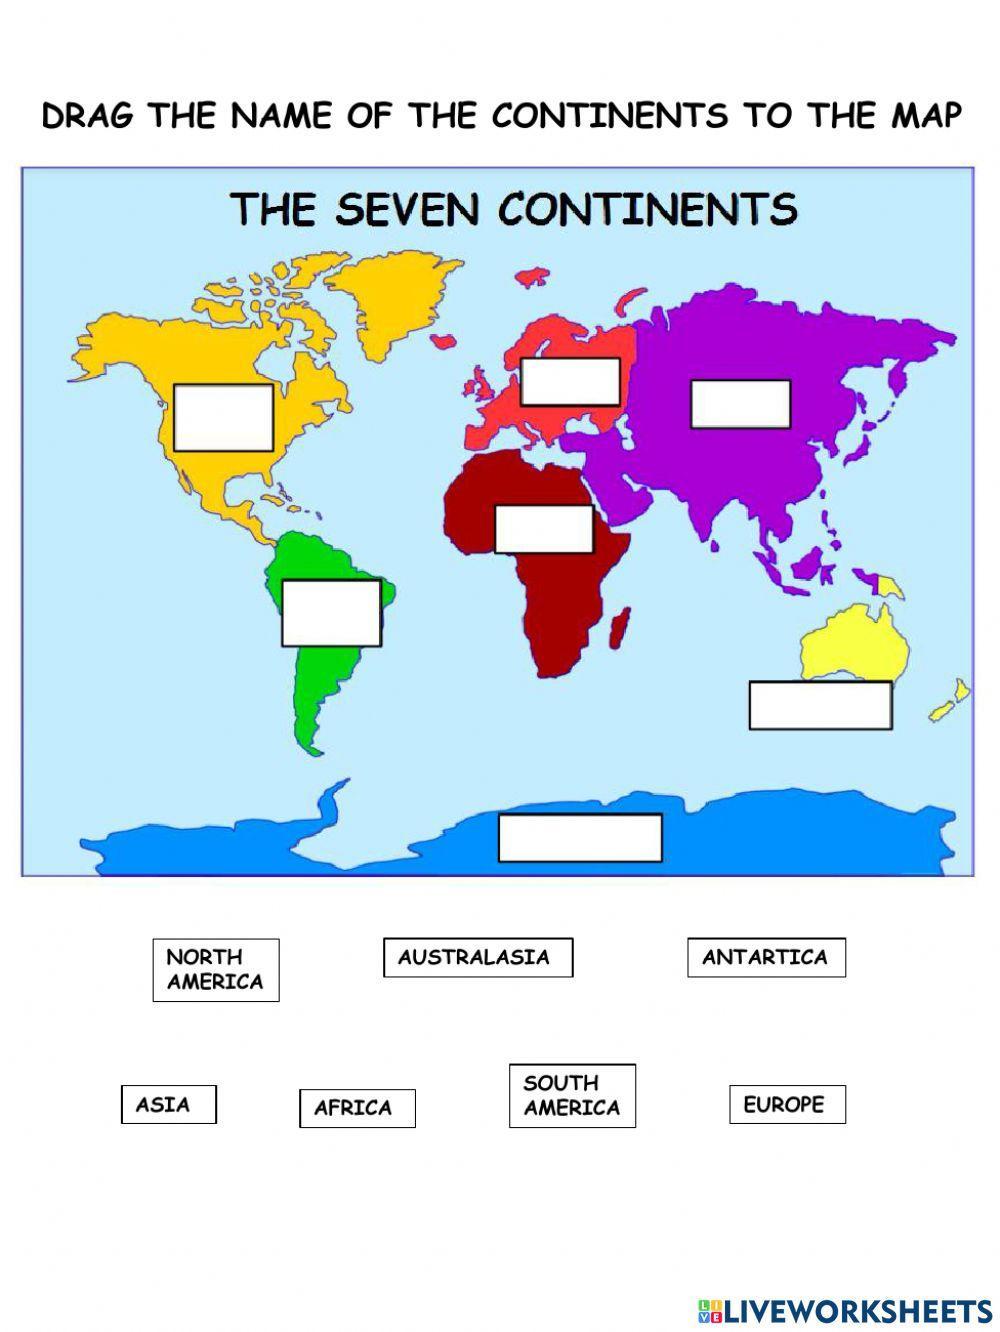 The seven continents